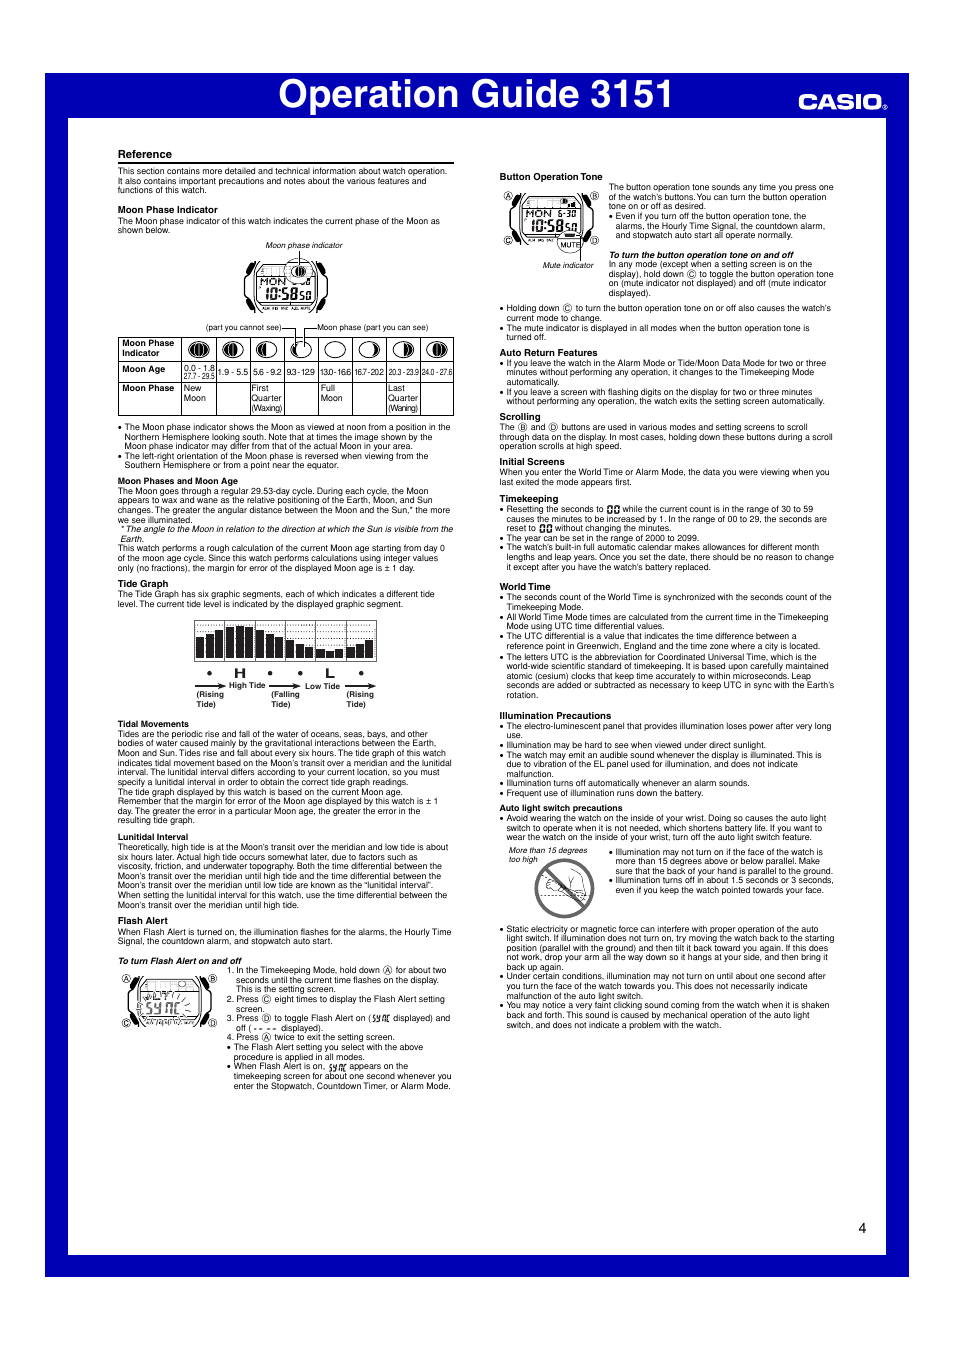 Reference, Operation guide 3151 | G-Shock GLX-5600 User Manual | Page 4 / 5  | Original mode